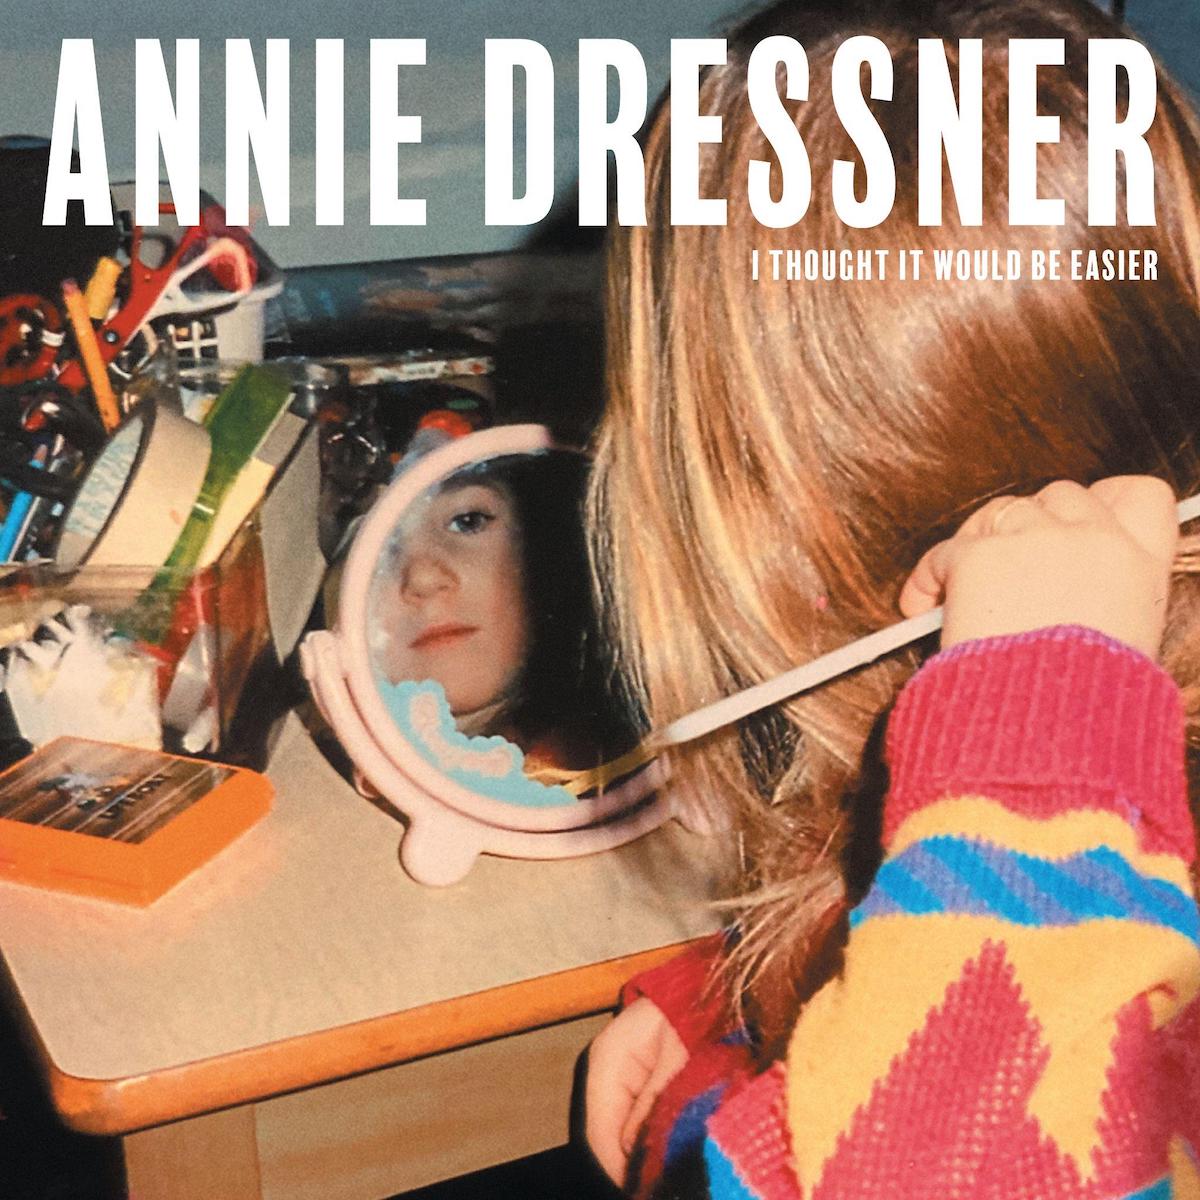 ALBUM REVIEW: I Thought It Would be Easier by Annie Dressner